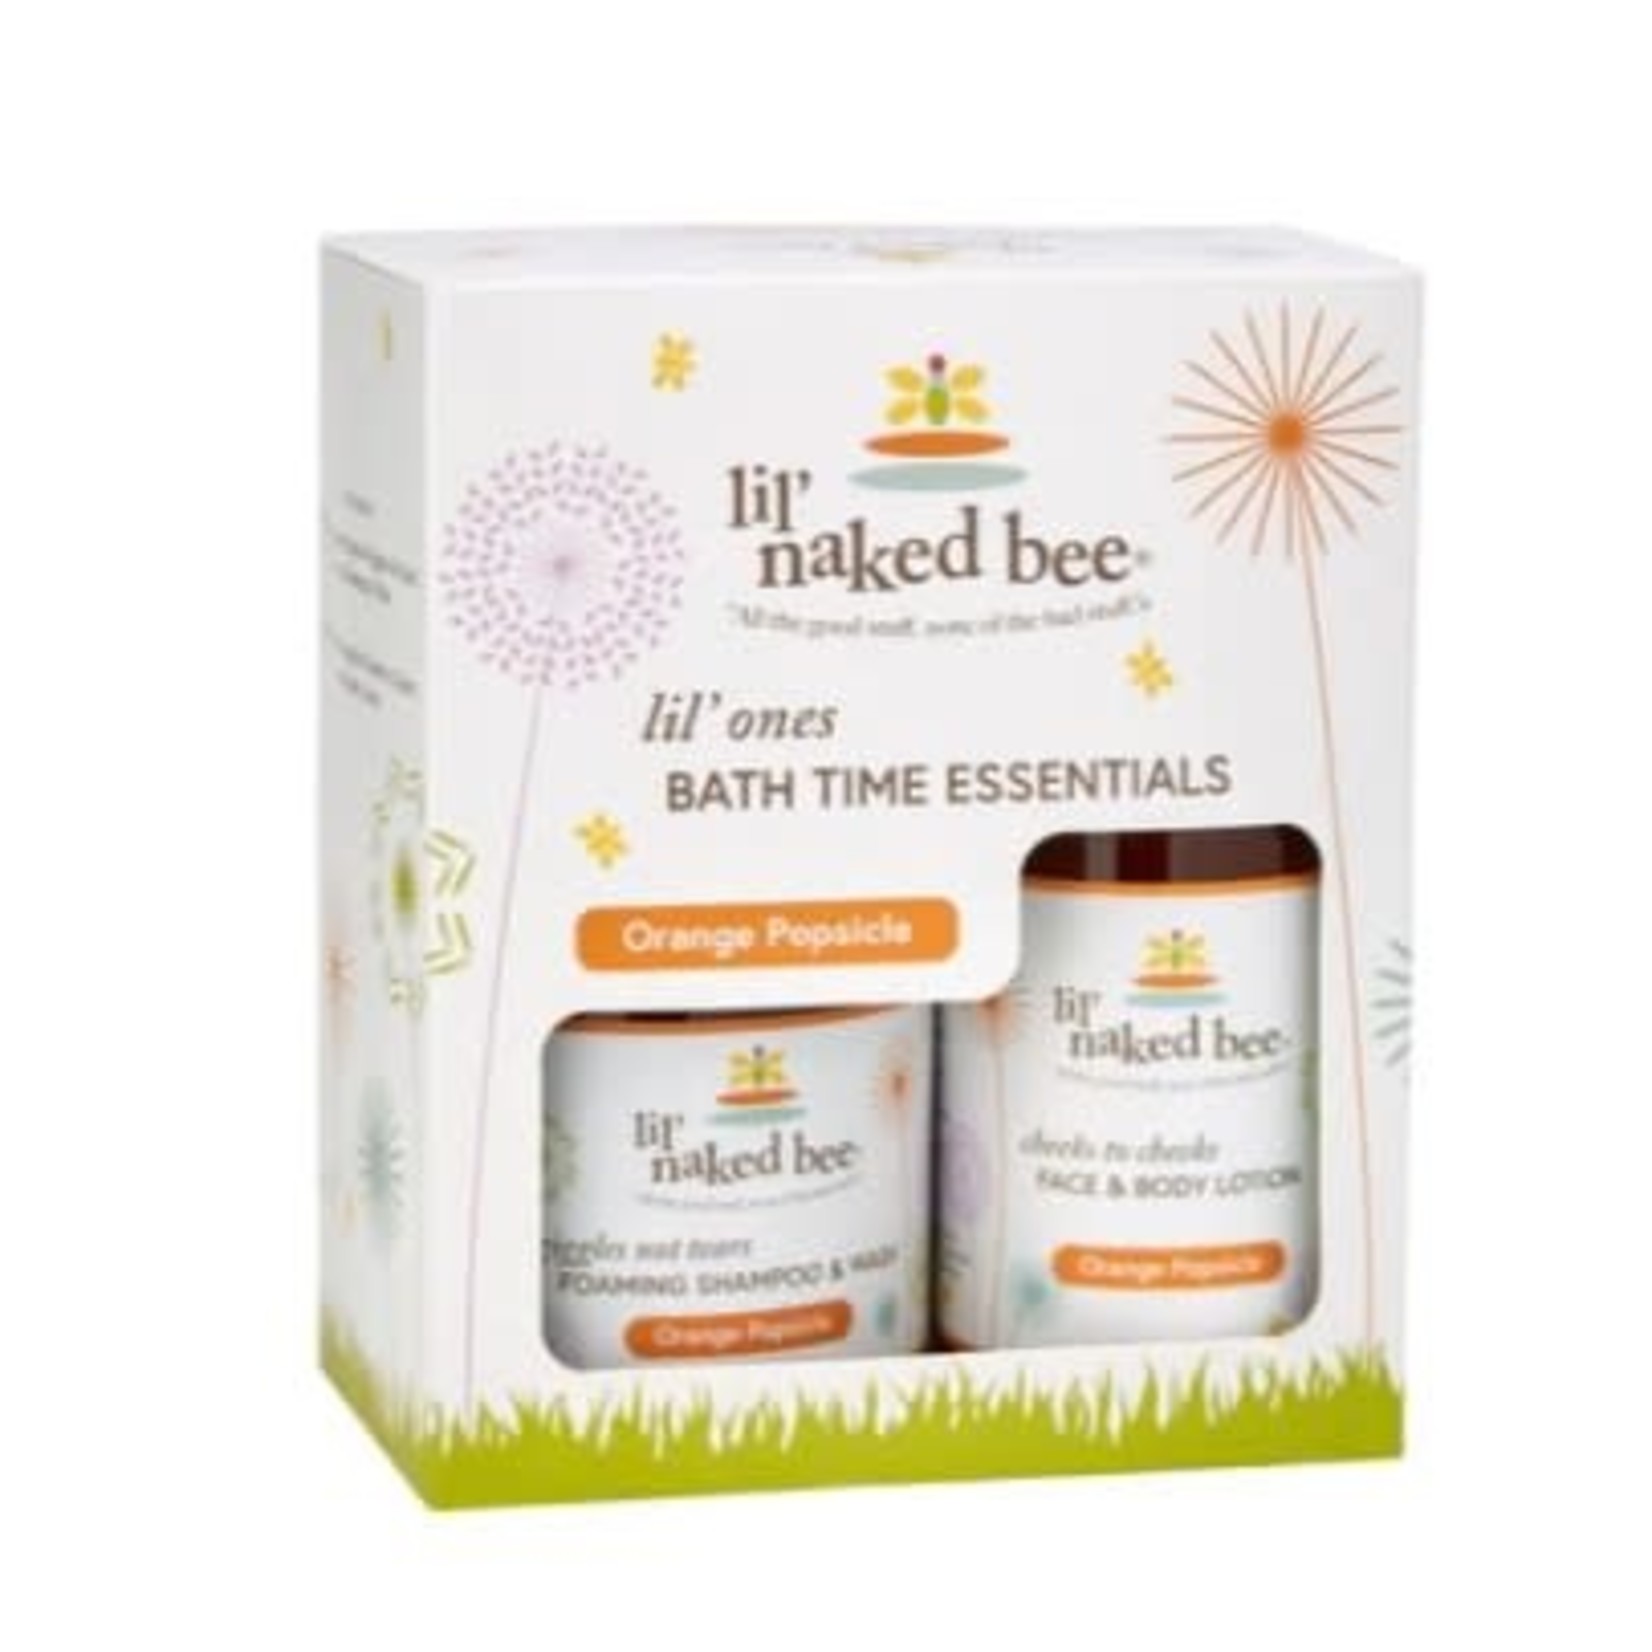 The Naked Bee Lil' Naked Bee Bath Time Essentials